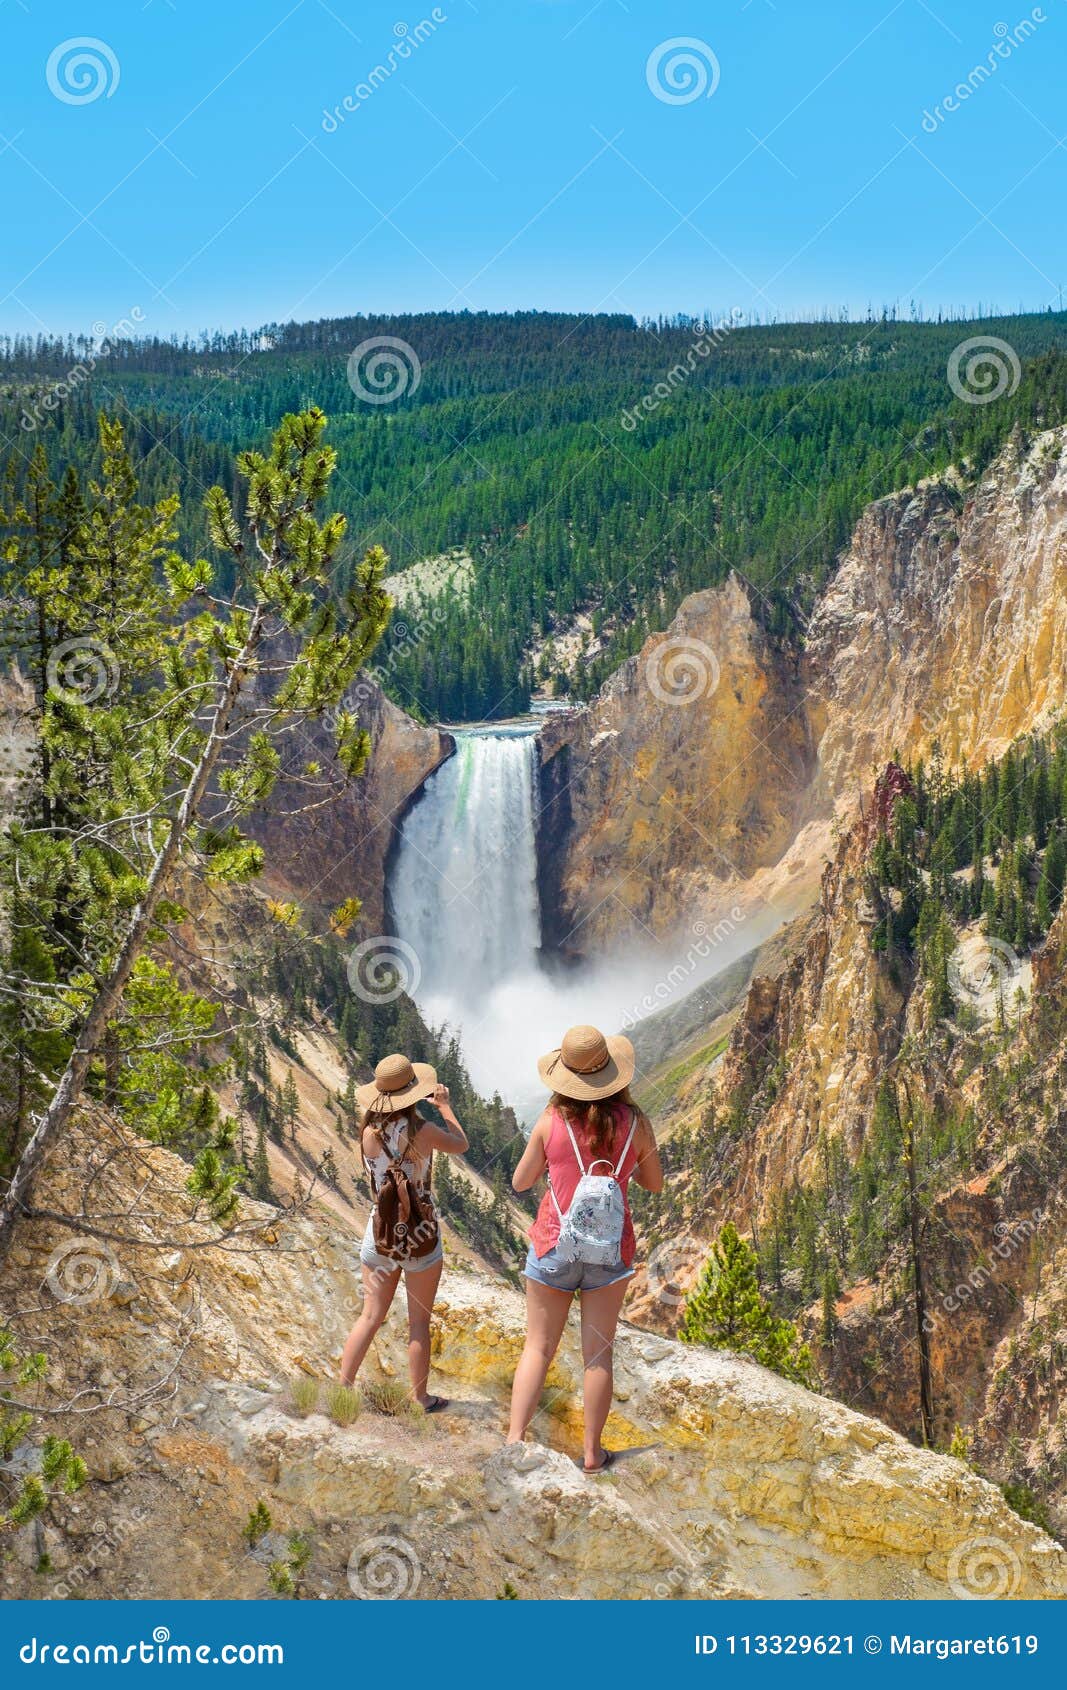 Friends Taking Photos and Enjoying Beautiful View of Waterfall on Hiking  Trip in the Mountains. Stock Image - Image of enjoyment, hiking: 113329621